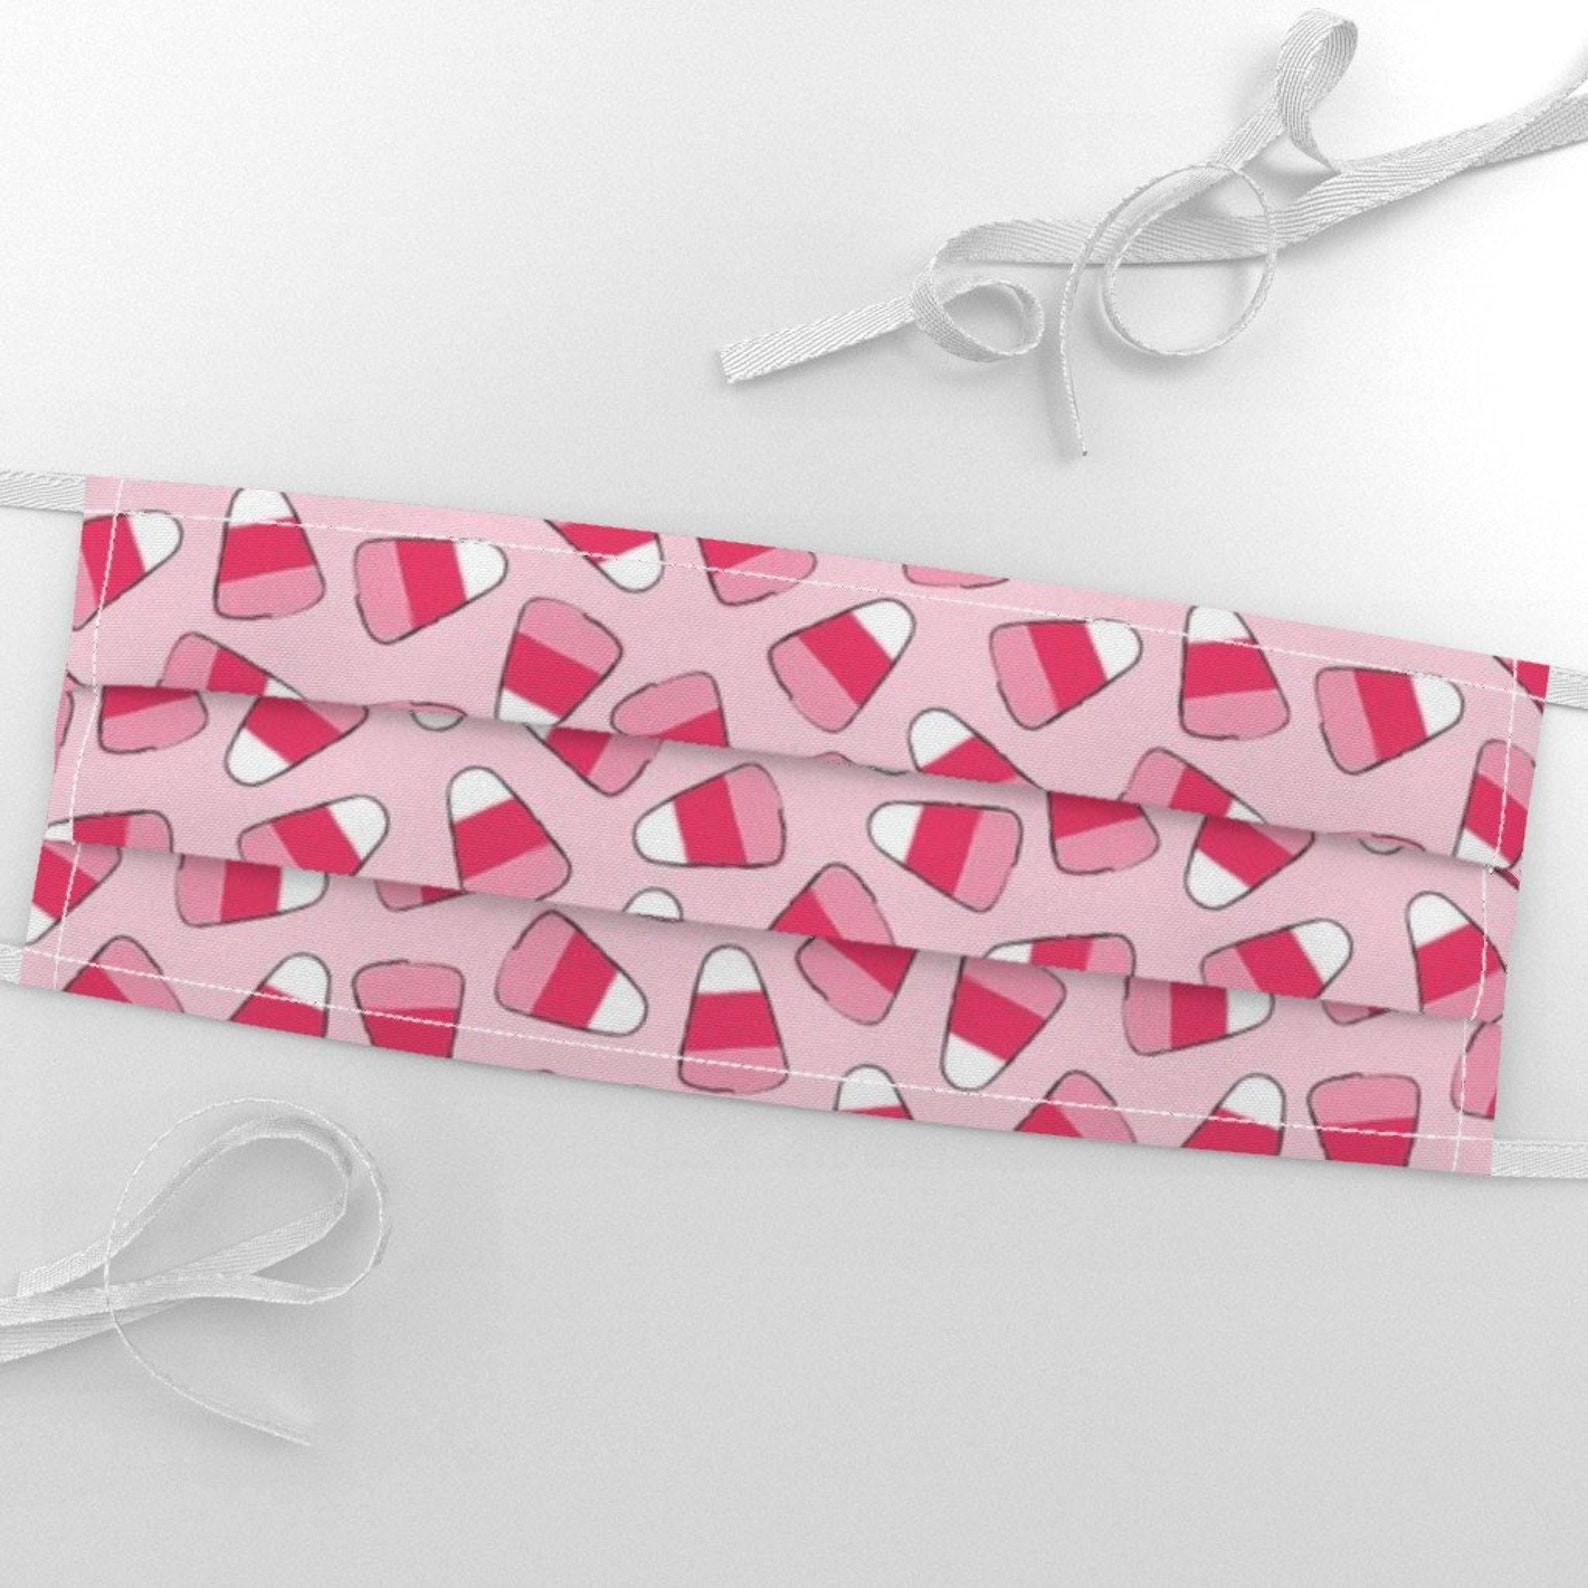 Valentines Day Candy Corn
 Pink Candy Corn Fabric Valentines Day Candy Corn By